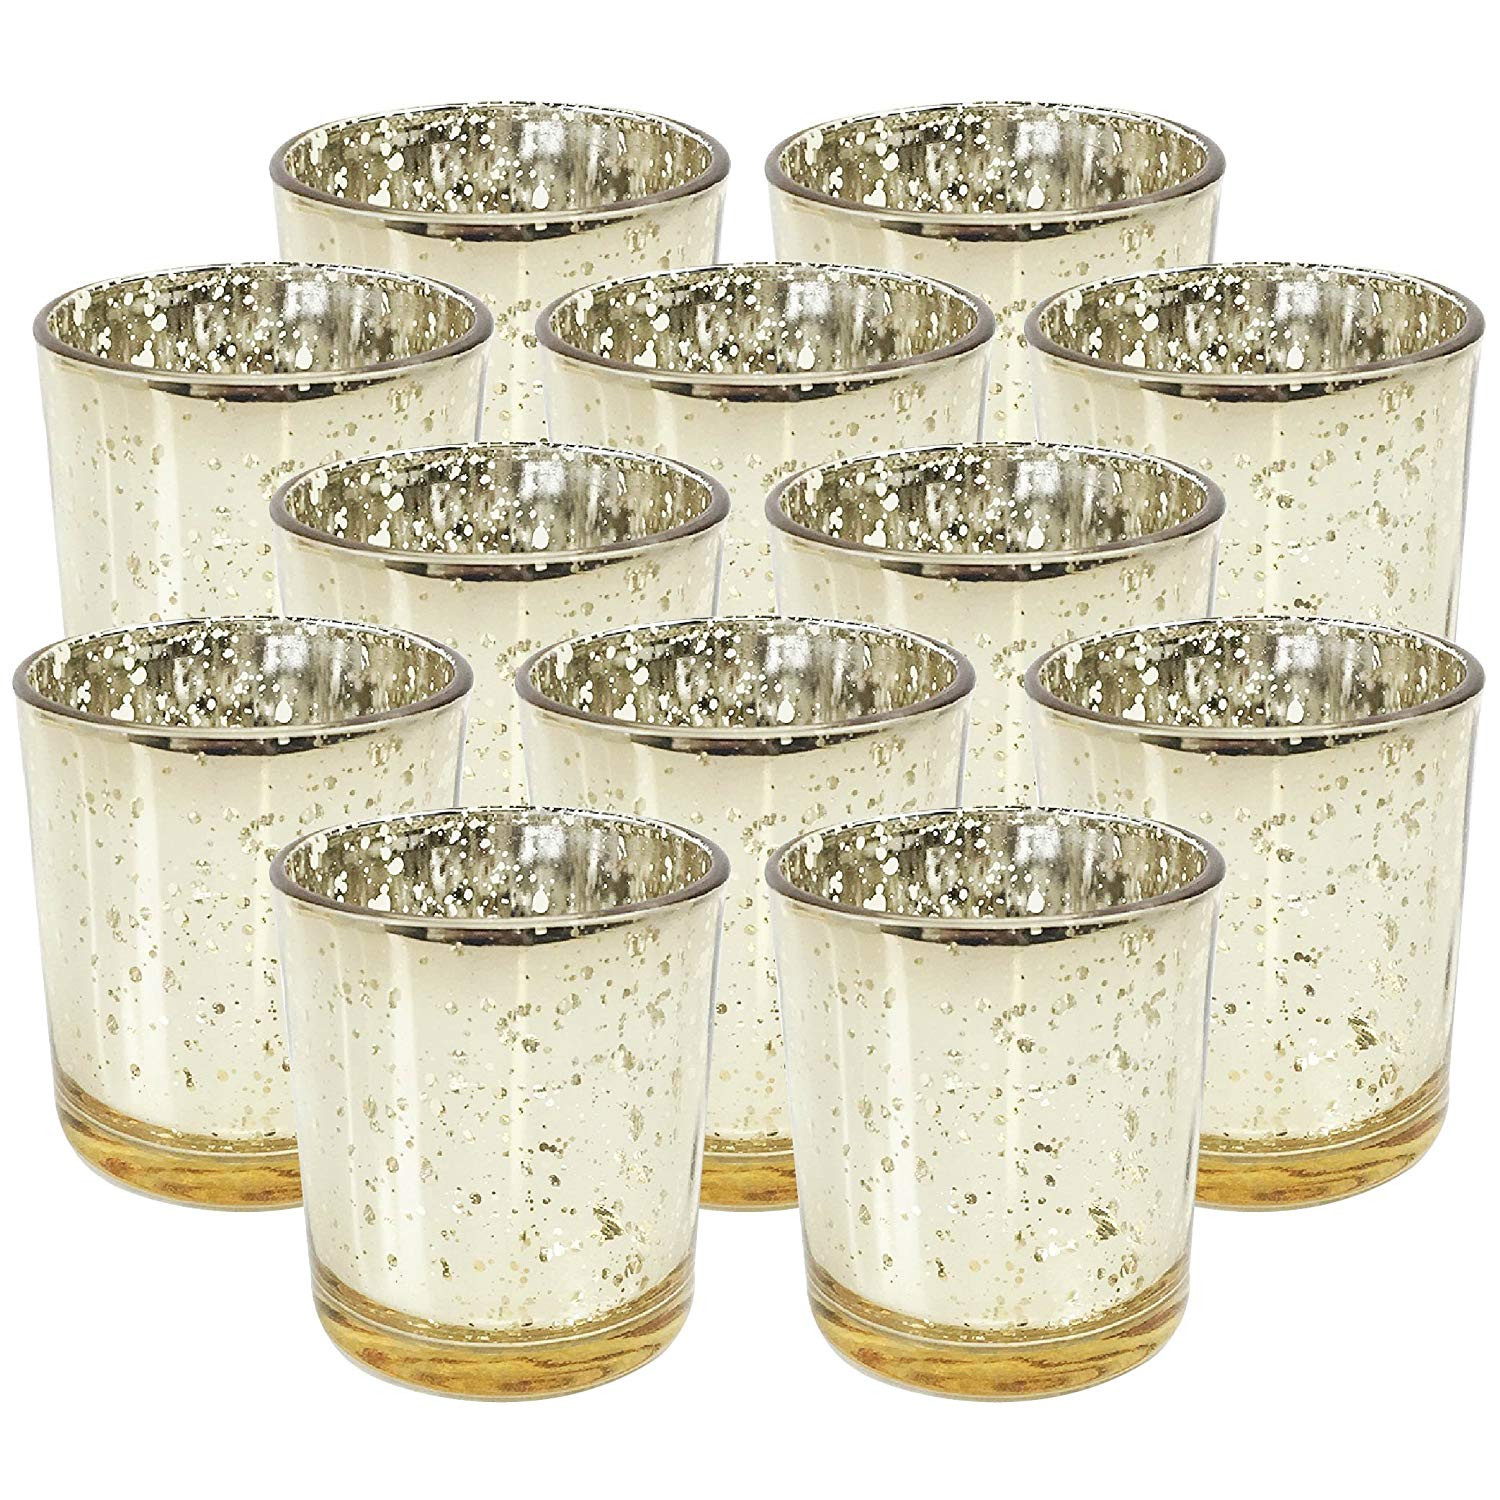 20 Great Round Mercury Glass Vase 2024 free download round mercury glass vase of amazon com just artifacts mercury glass votive candle holders 4in for amazon com just artifacts mercury glass votive candle holders 4in speckled gold set of 12 me